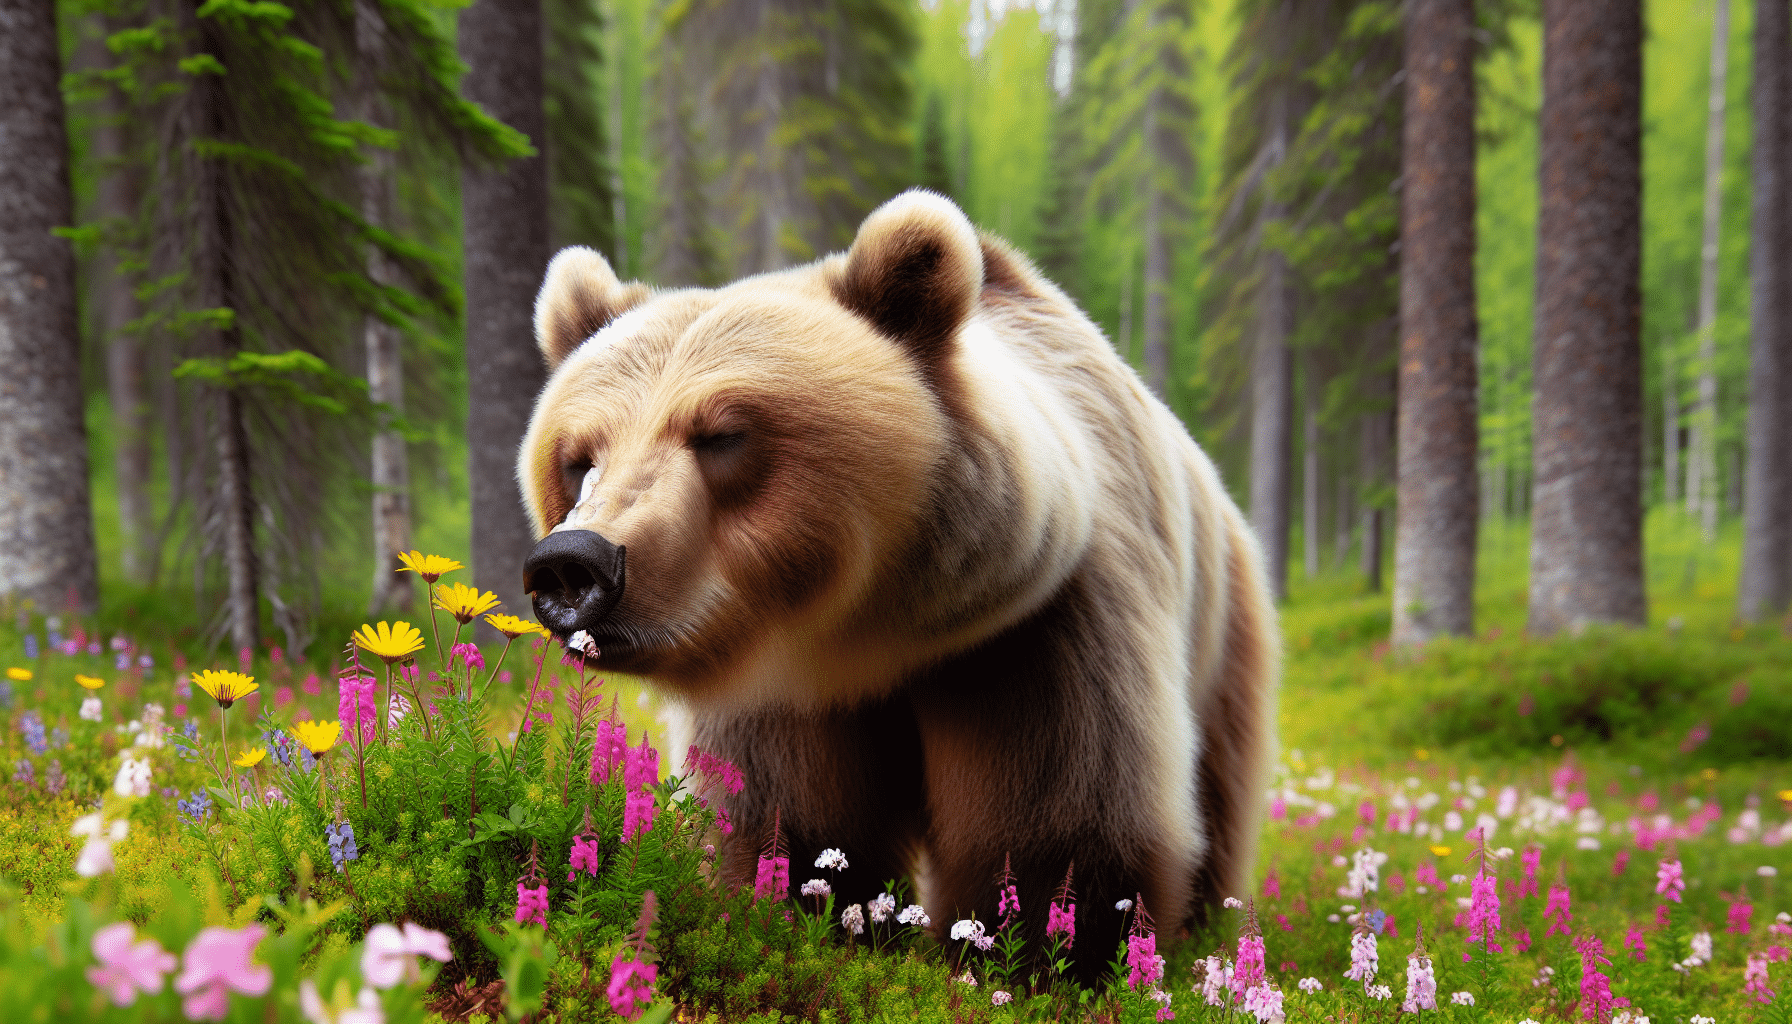 A scenic woodland environment during the day featuring a large, healthy, brown bear leaning over to sniff a patch of colorful wildflowers. The bear's nose touches the flowers while its eyes close, depicting a sense of deep inhalation. No humans, textual content or brands are included in the image, conforming strictly to the requester's specifications.